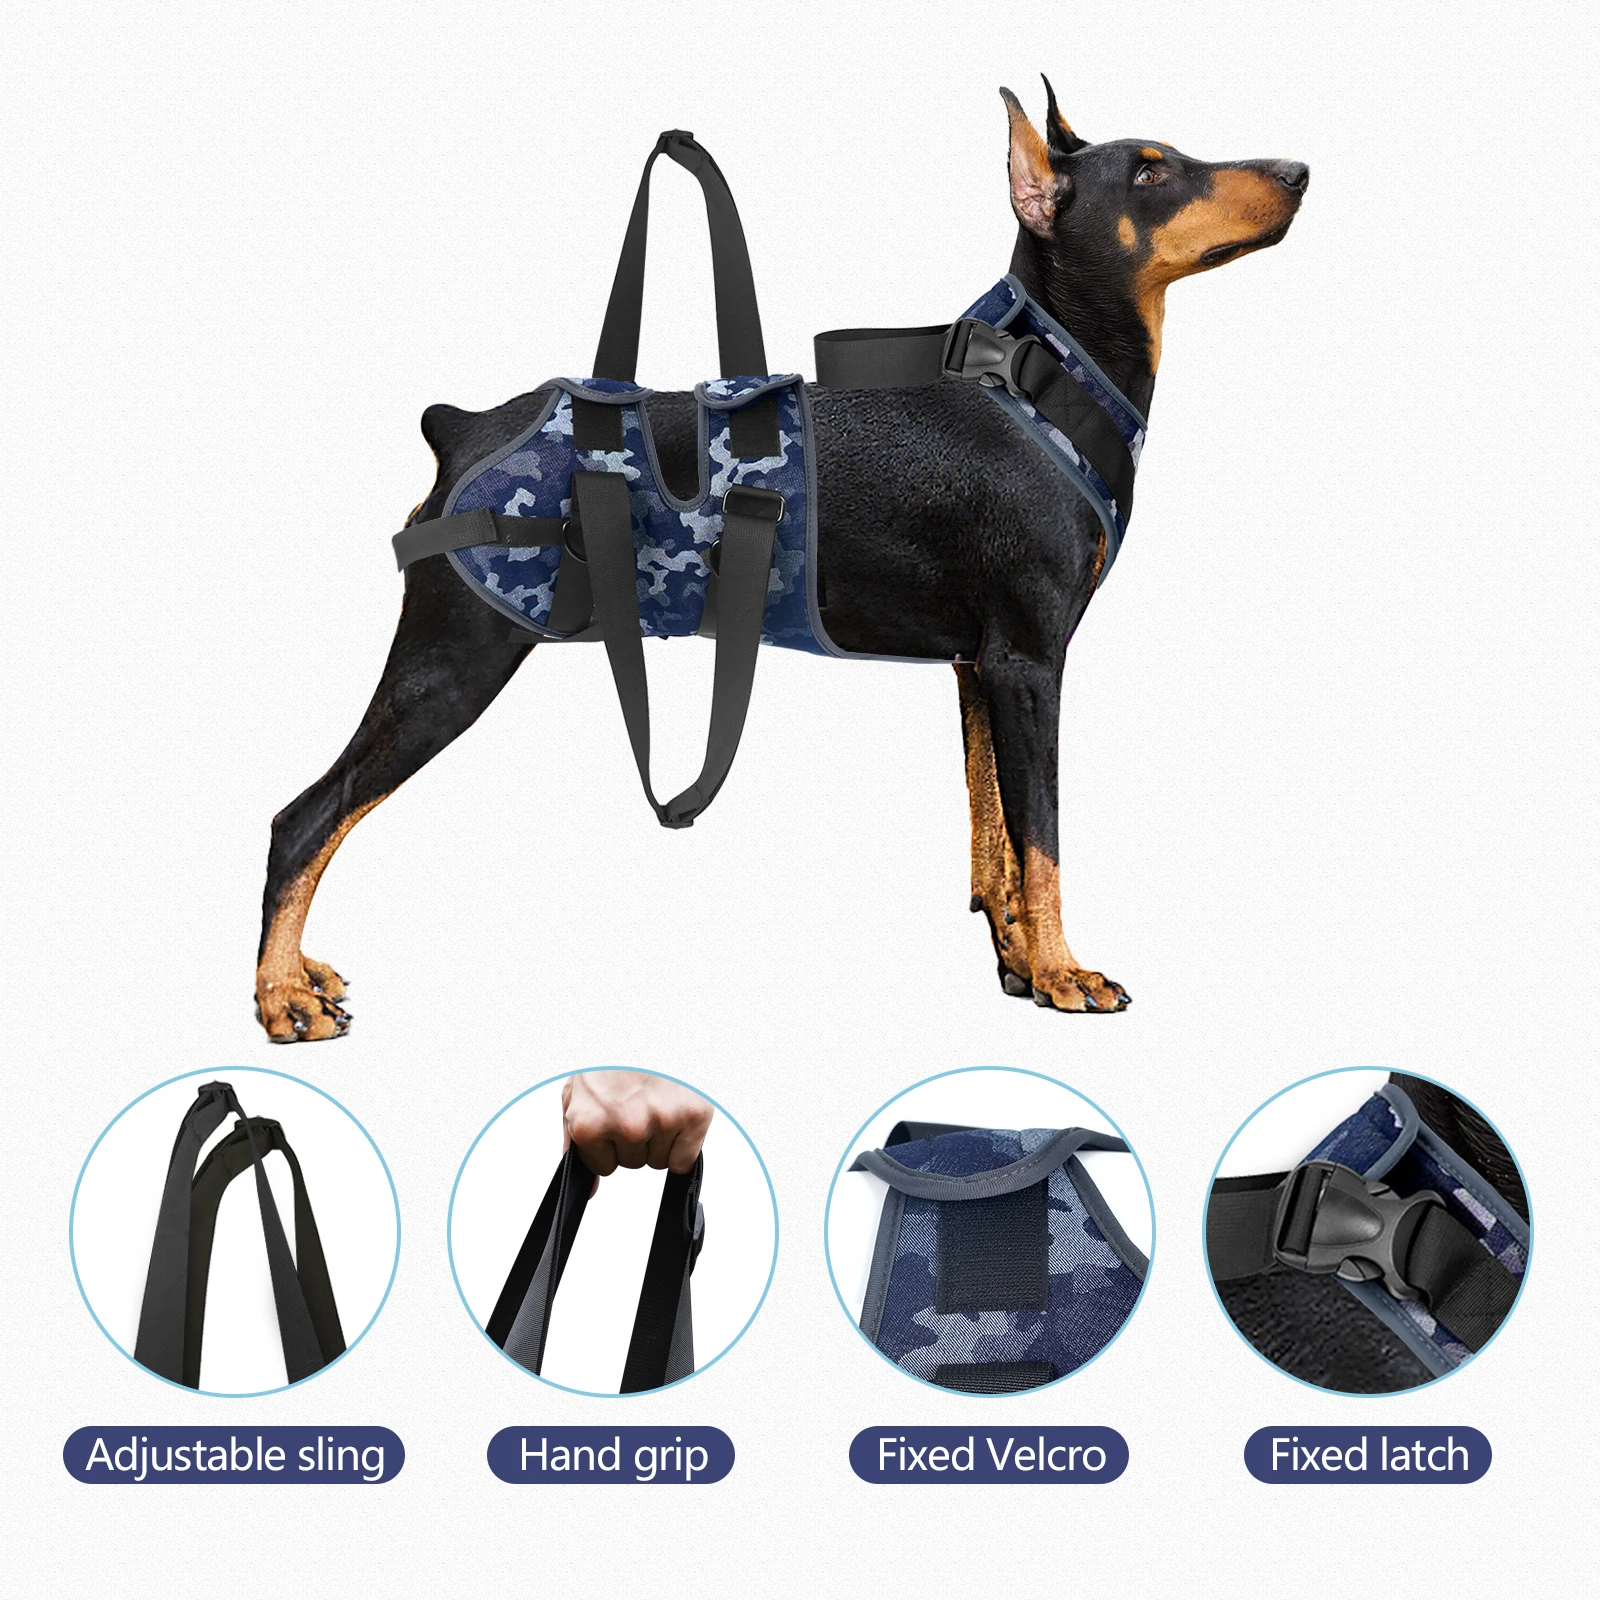 

Full-Body Adjustable Dog Lifting Harness Front and Rear Legs Support Pet Accessories for Canine Aid and Ligament Rehabilitation